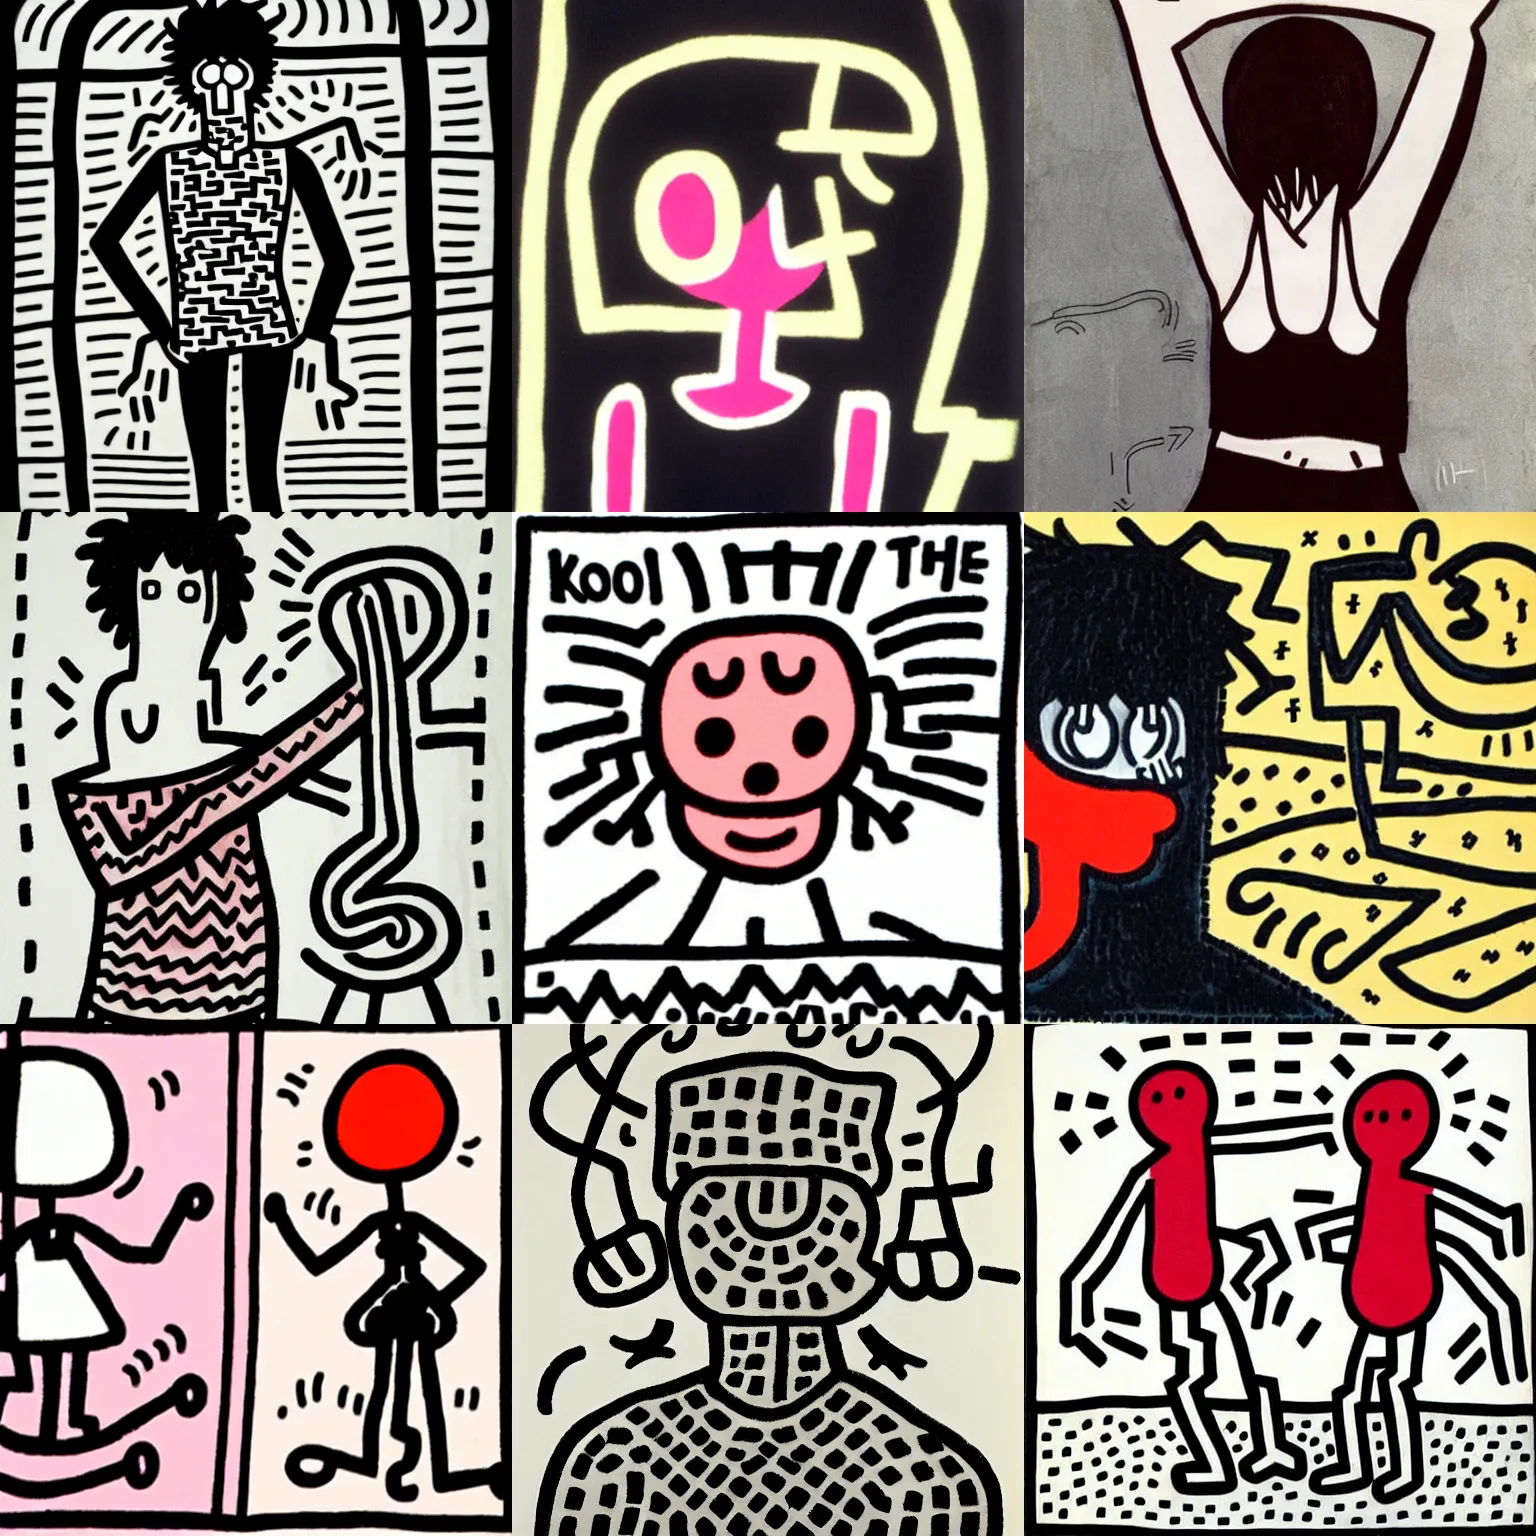 Prompt: an emo by keith haring. her hair is dark brown and cut into a short, messy pixie cut. she has large entirely - black eyes. she is wearing a black tank top, a black leather jacket, a black knee - length skirt, a black choker, and black leather boots.